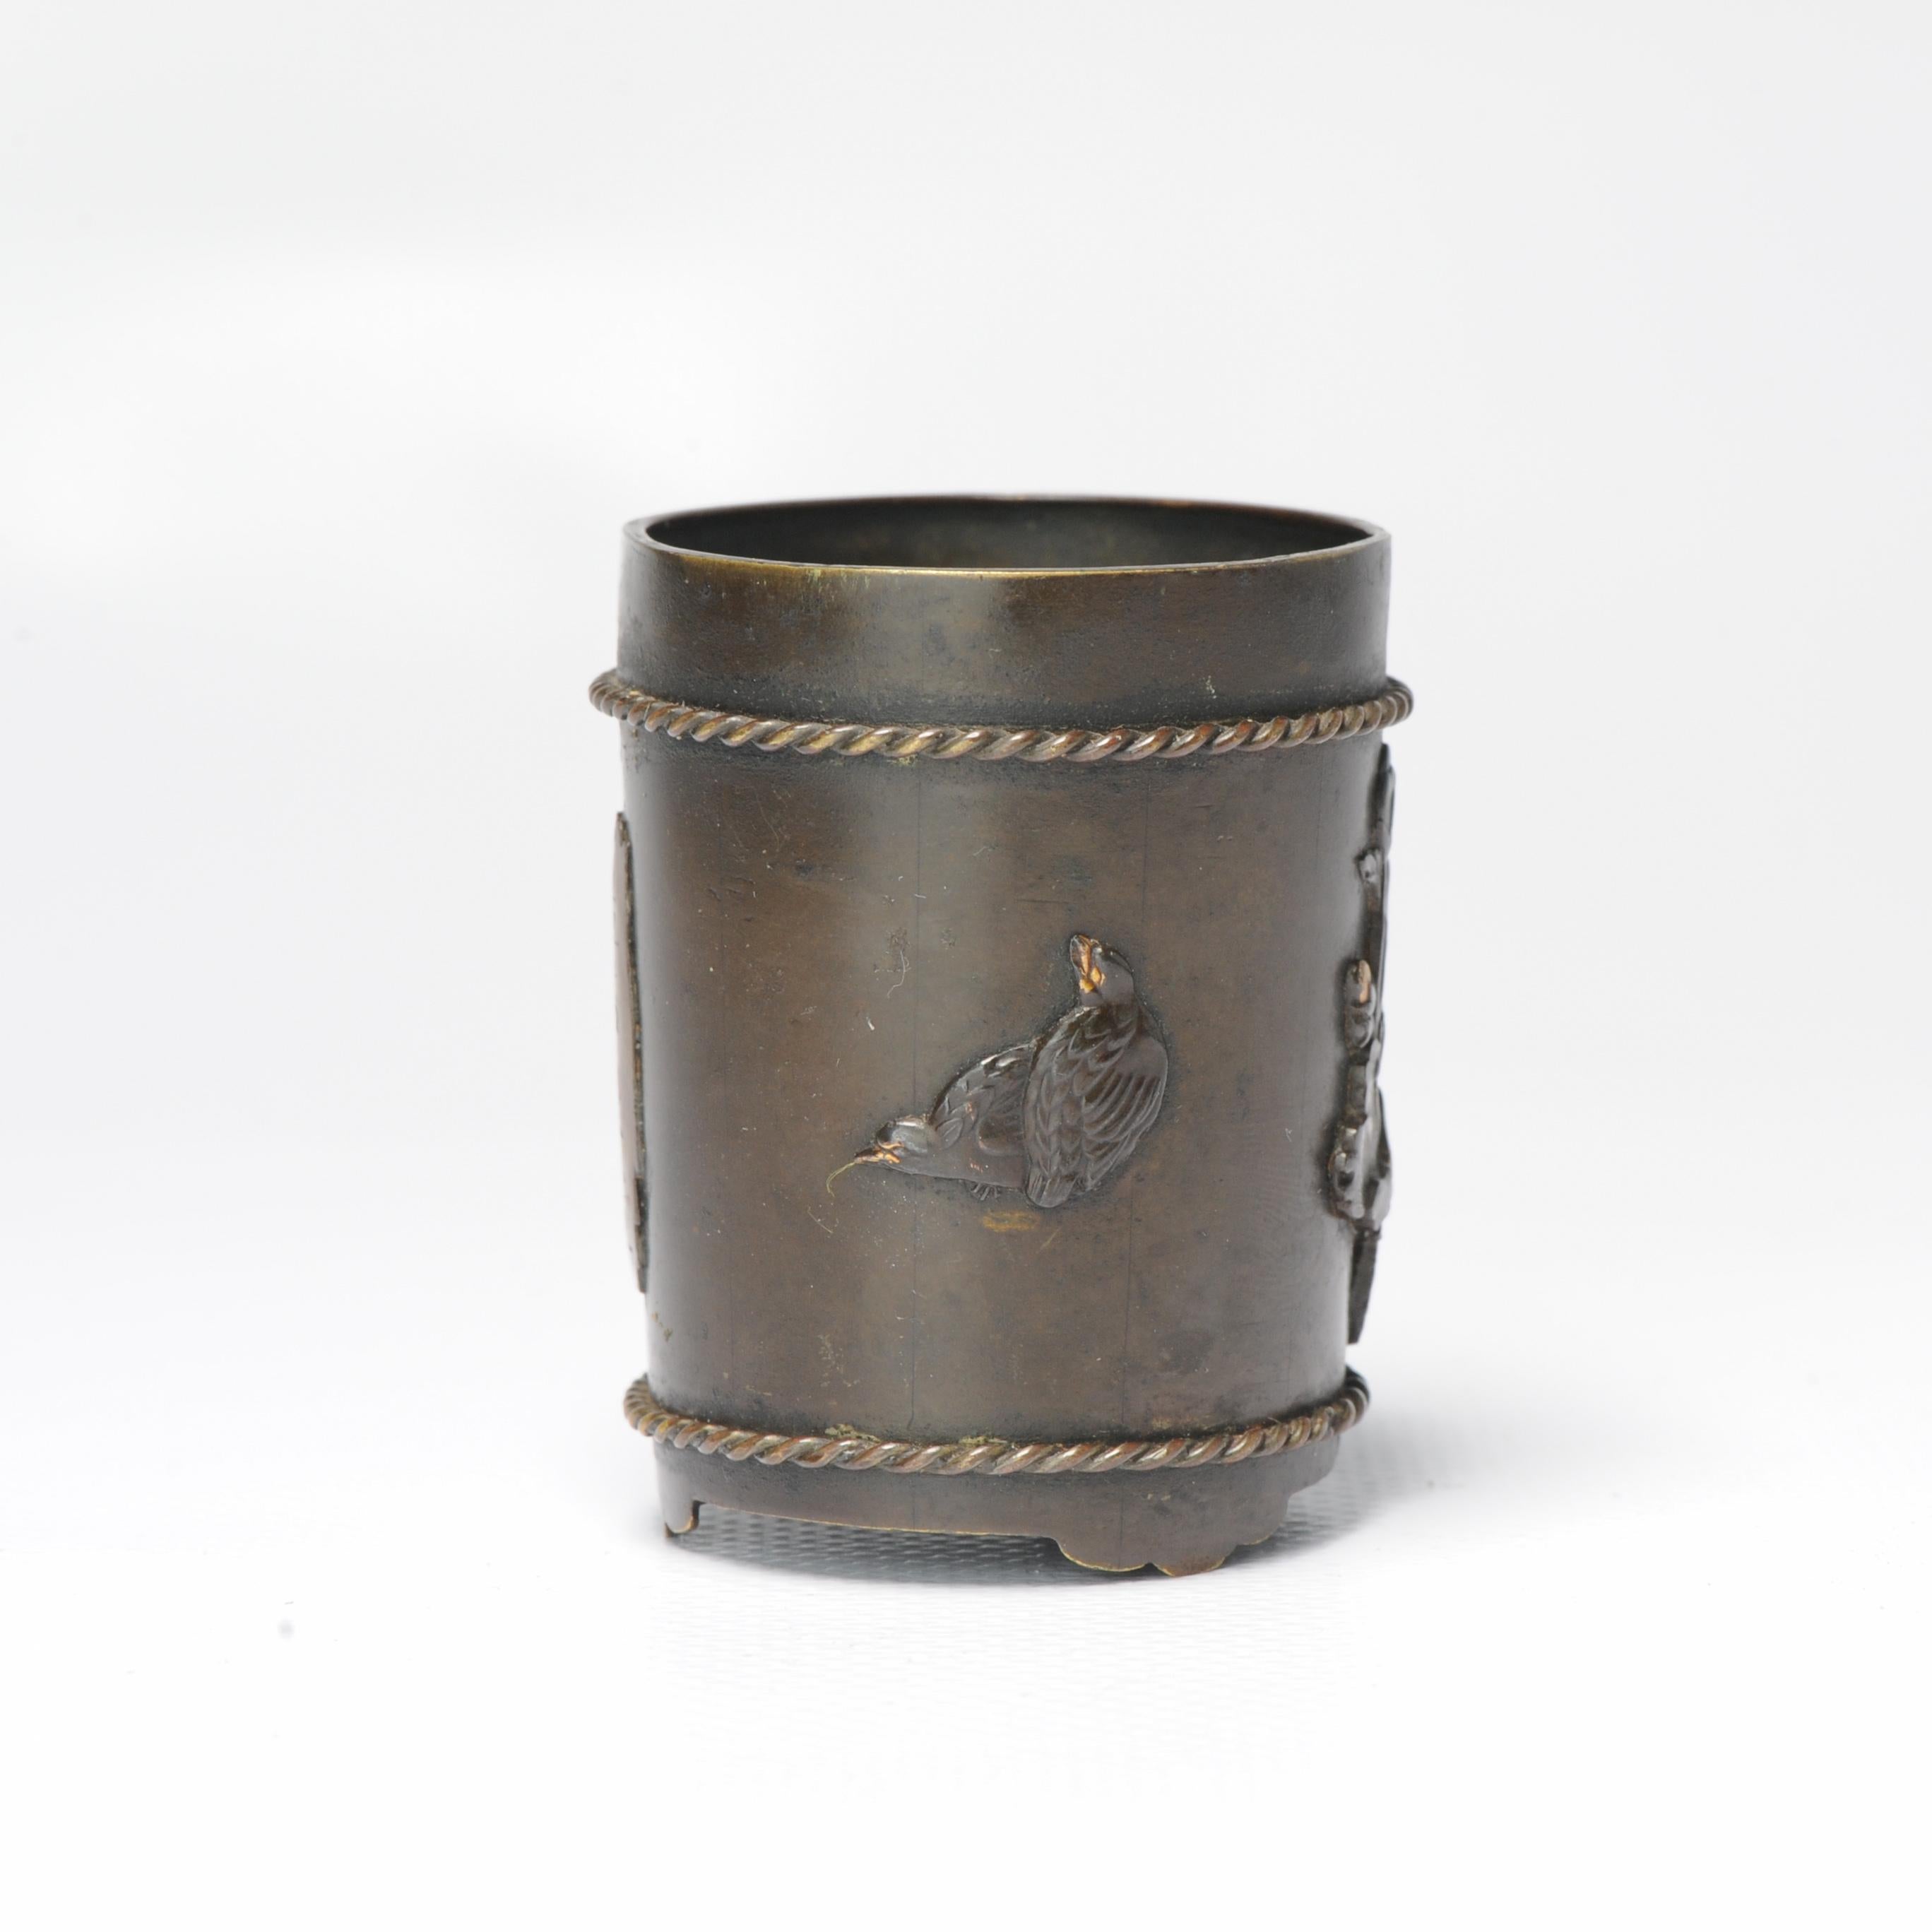 Nicely made jar with a great color shading and gilding.

Marked on the side: made by Sato.

Additional information:
Material: Porcelain & Pottery
Region of Origin: Japan
Period: 19th century Edo Period (1603–1867), Meiji Periode